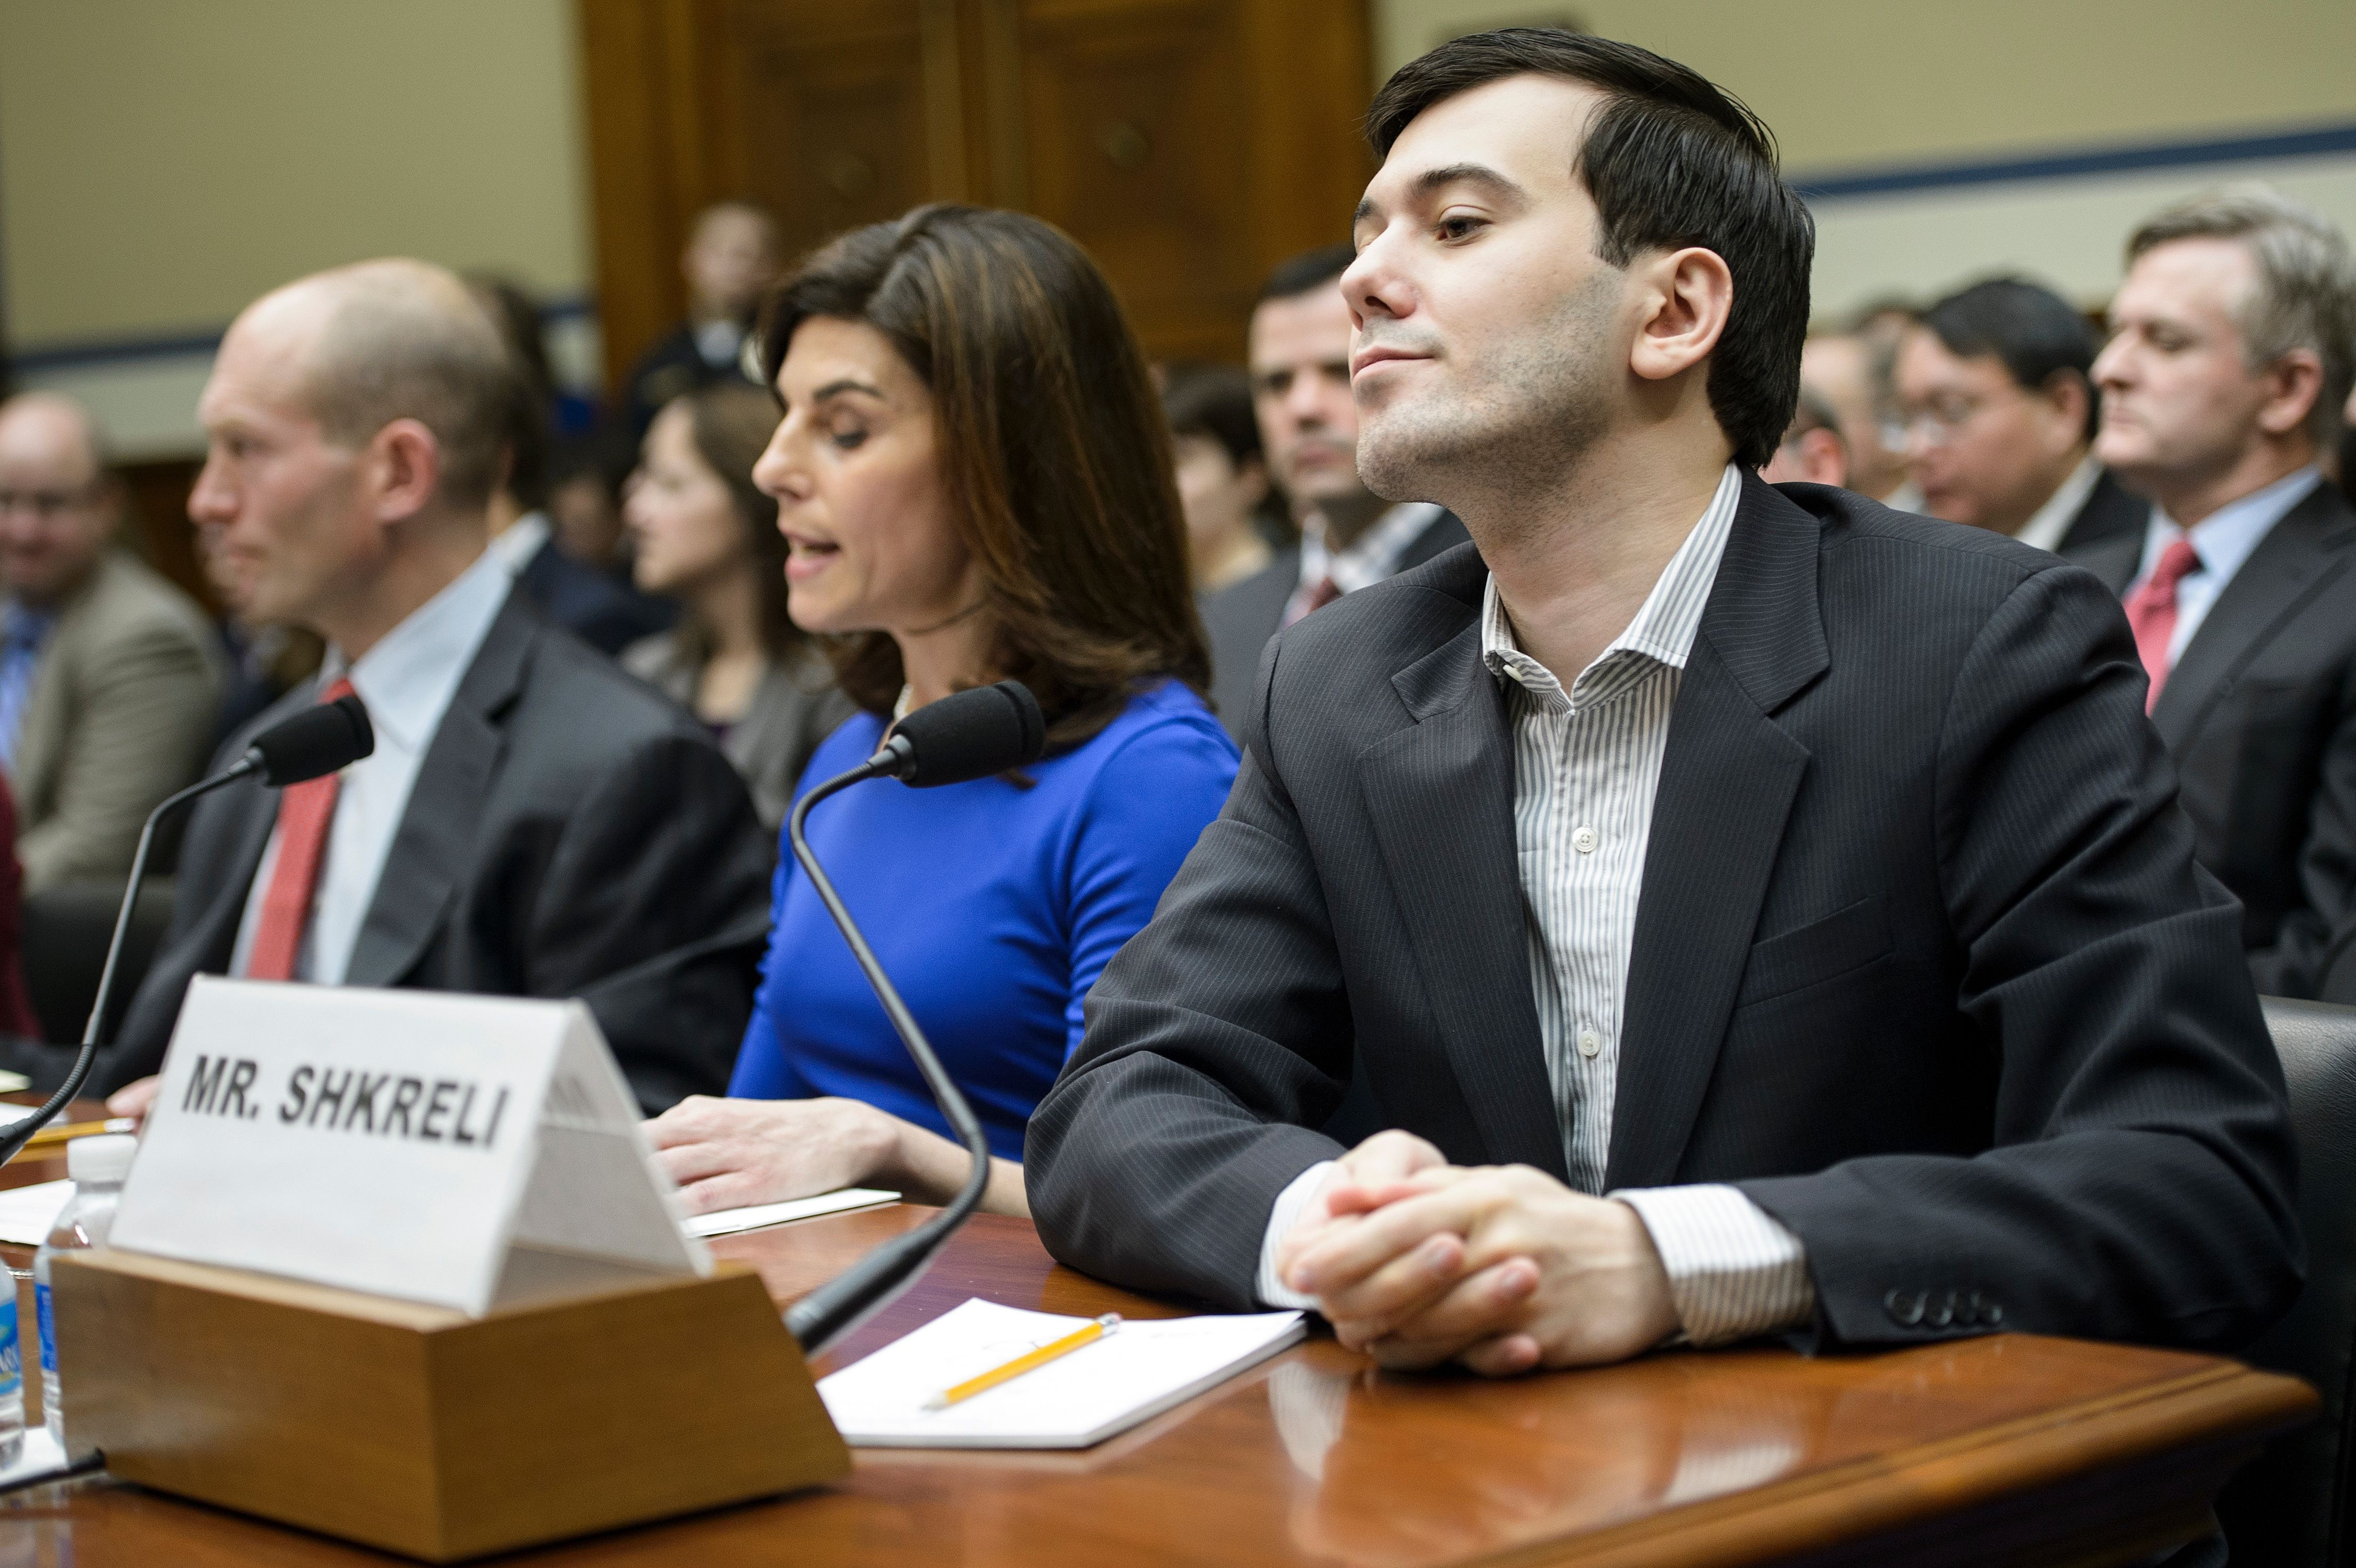 Martin Shkreli listens during a hearing of the House Oversight and Government Reform Committee on Capitol Hill February 4, 2016. (Getty)